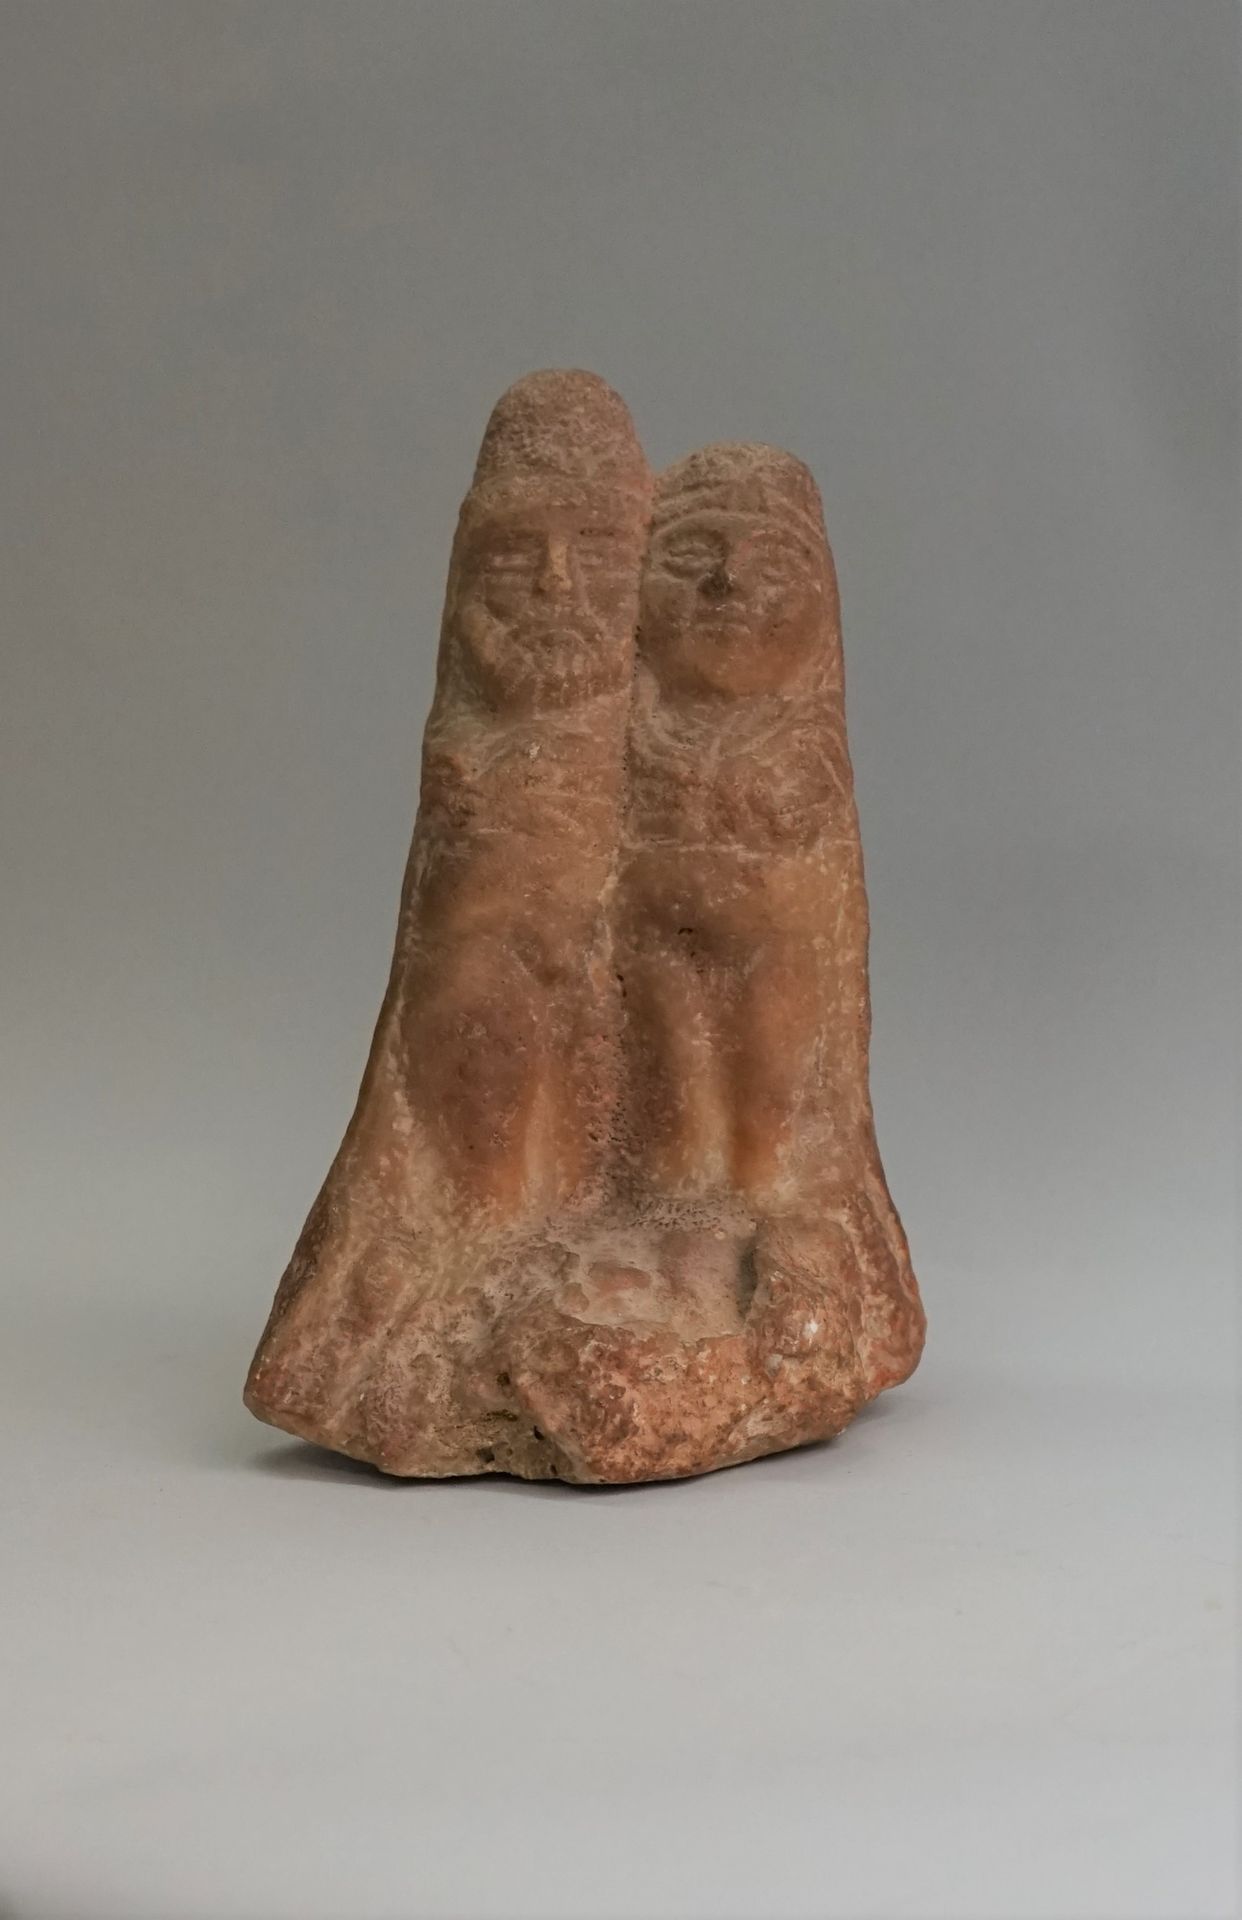 Null Couple embraced in beige orangy stone of Parthian style. 22.5x13cm